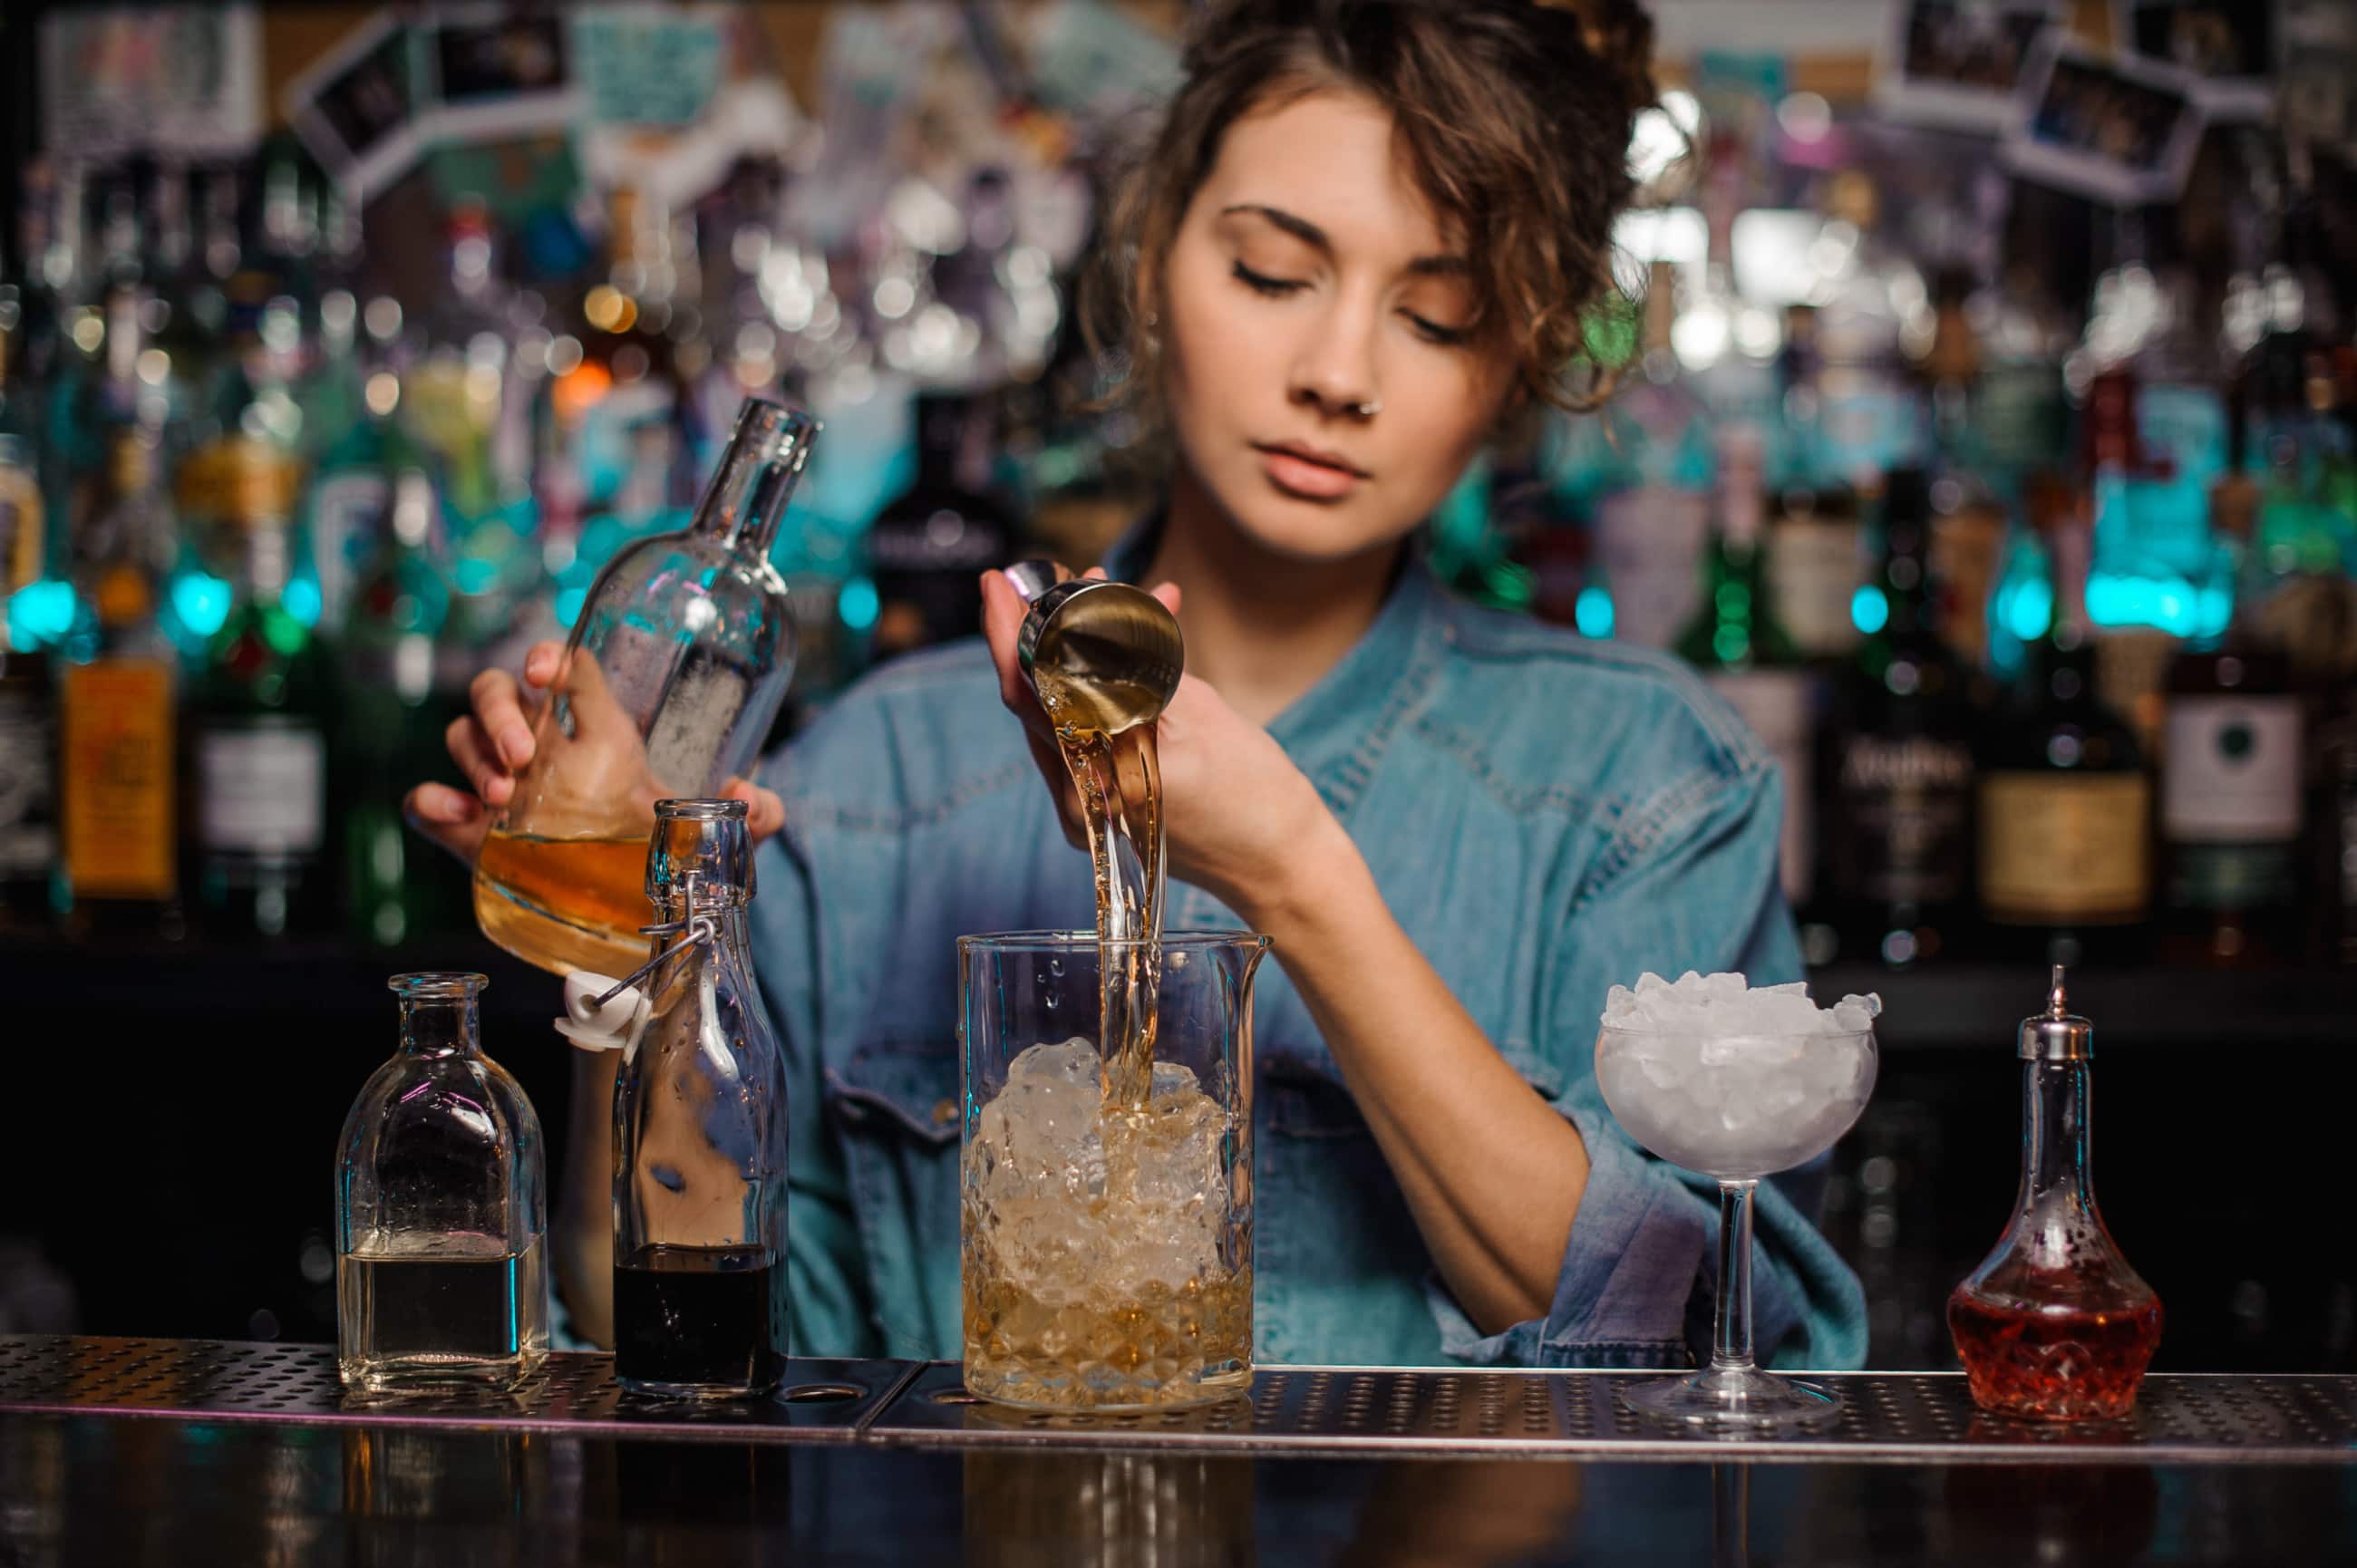 How to Improve Customer Service in Your Bar